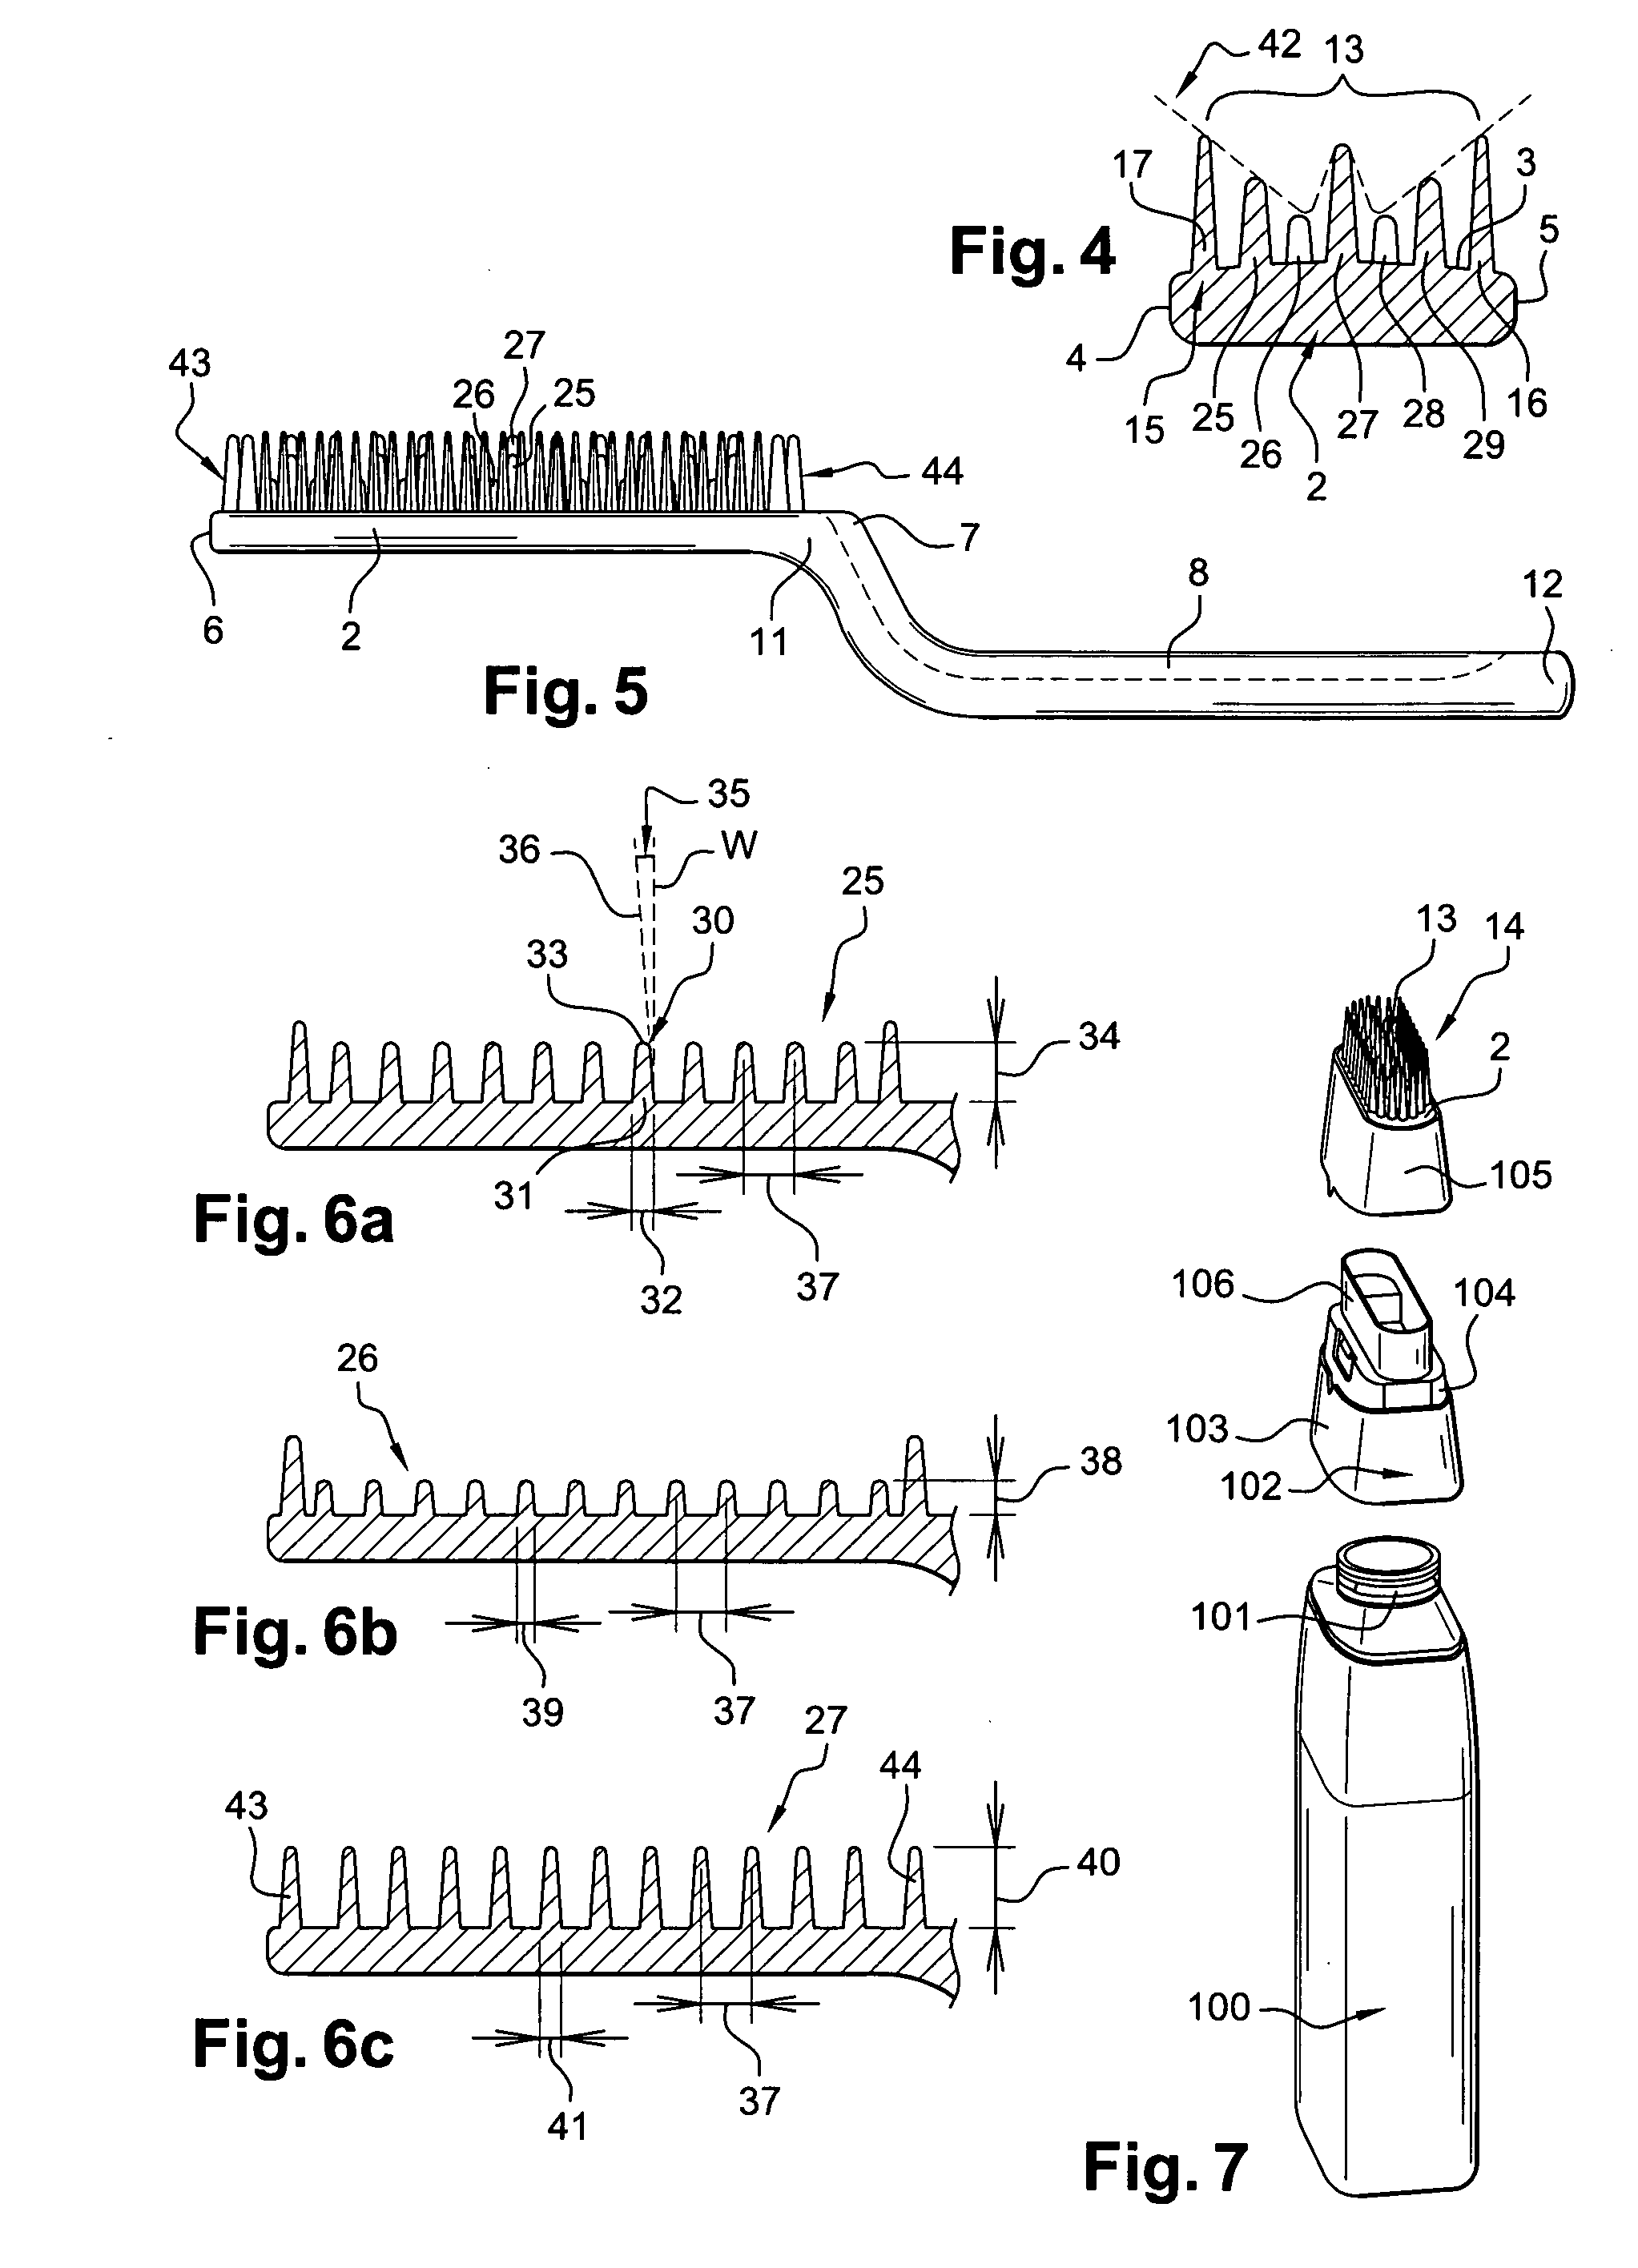 Device for applying a hair product